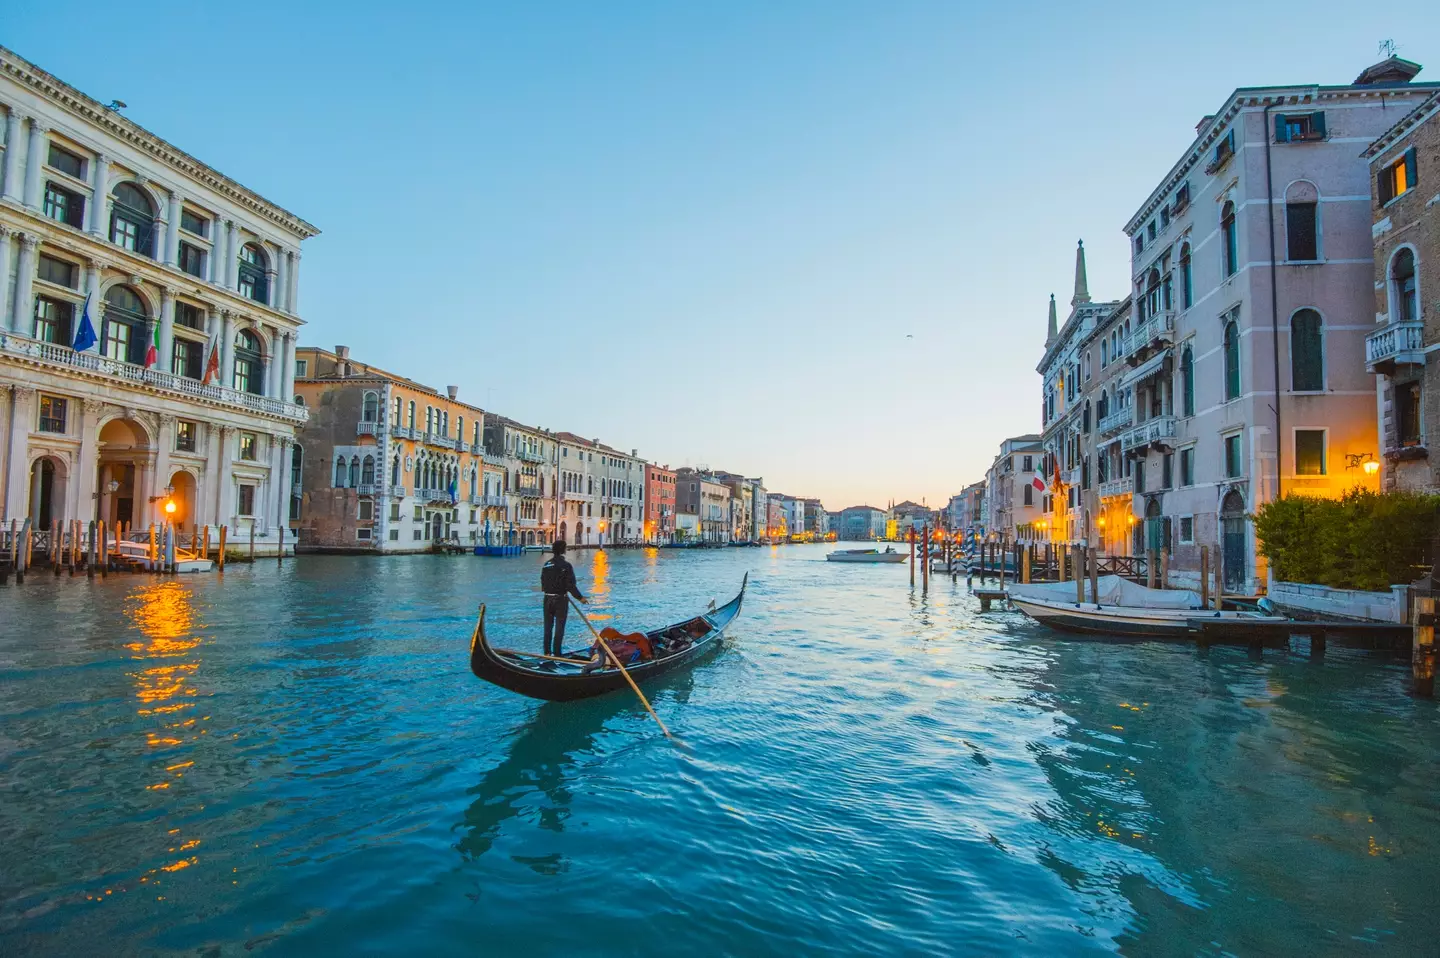 Grand Canal in Venice (Getty Stock Images)